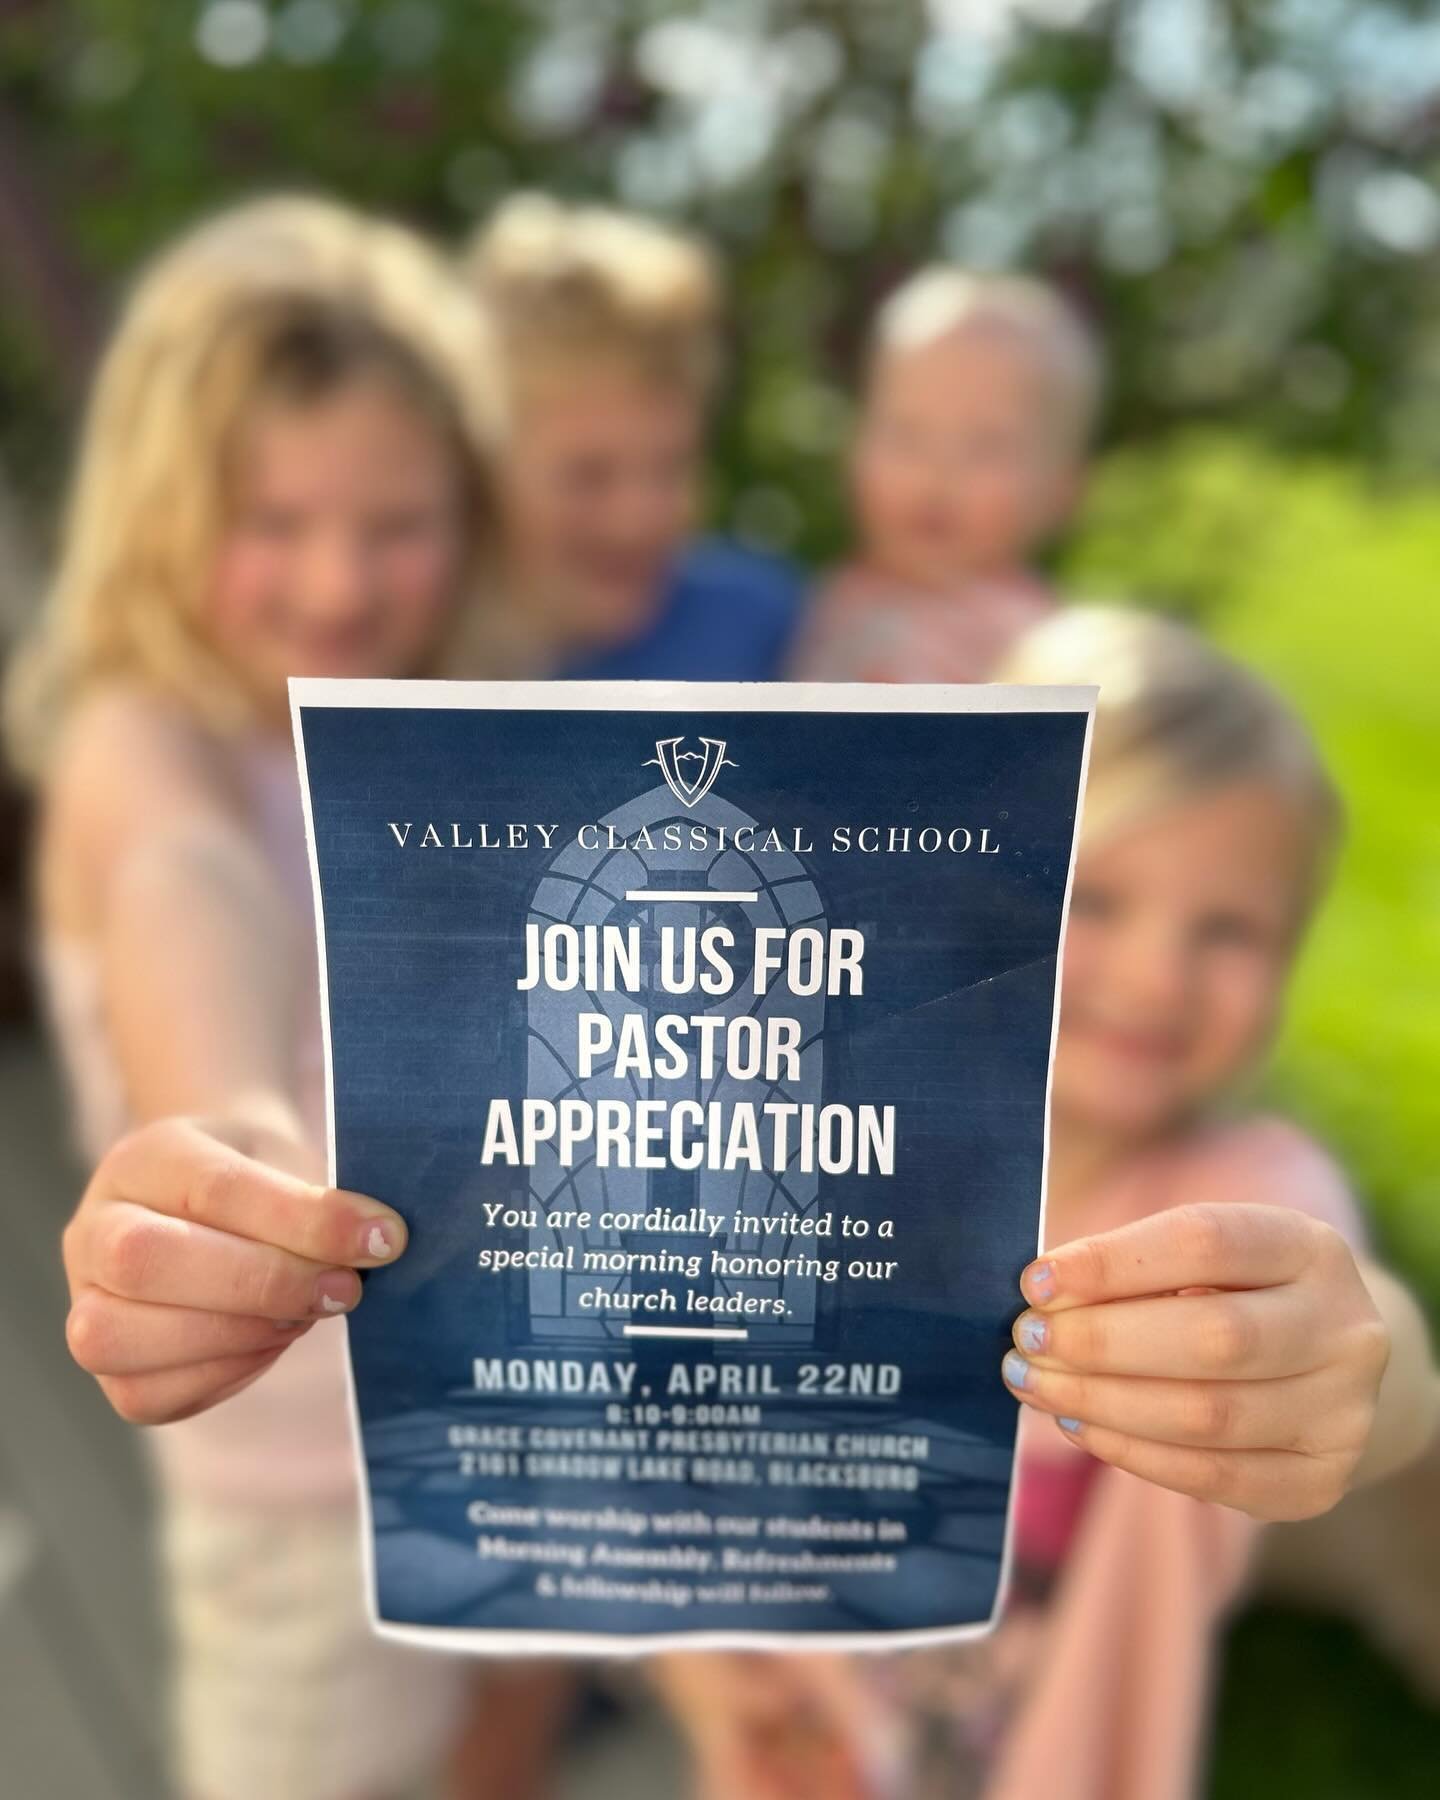 Attention, church leaders!! Have you received this flyer from a cute church member yet?? 

If not, we cordially invite you for Pastor Appreciation Day on Monday, April 22 from 8:10-9:00am. Swipe for full invite. 

Families: here&rsquo;s your reminder